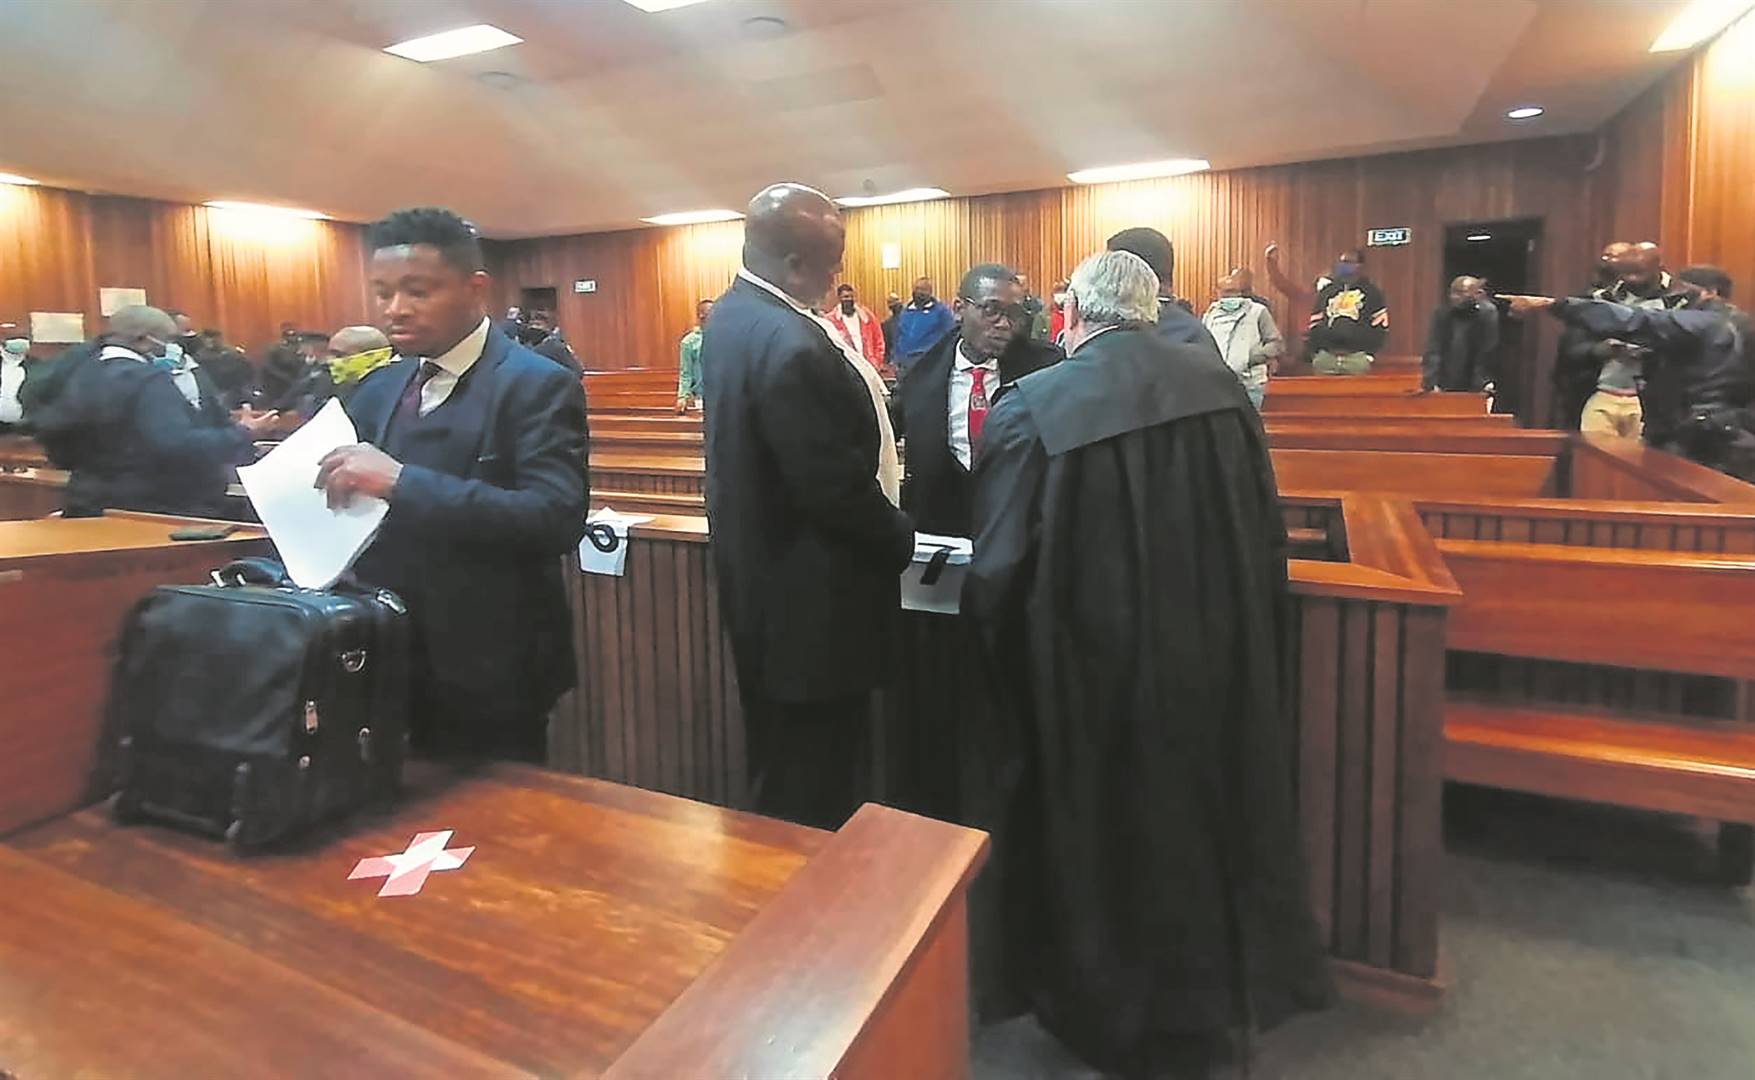 Murder-accused Vusi Mathibela (red tie), along with his co-accused, will hear judgment on their case on today. Photo by Aaron Dube